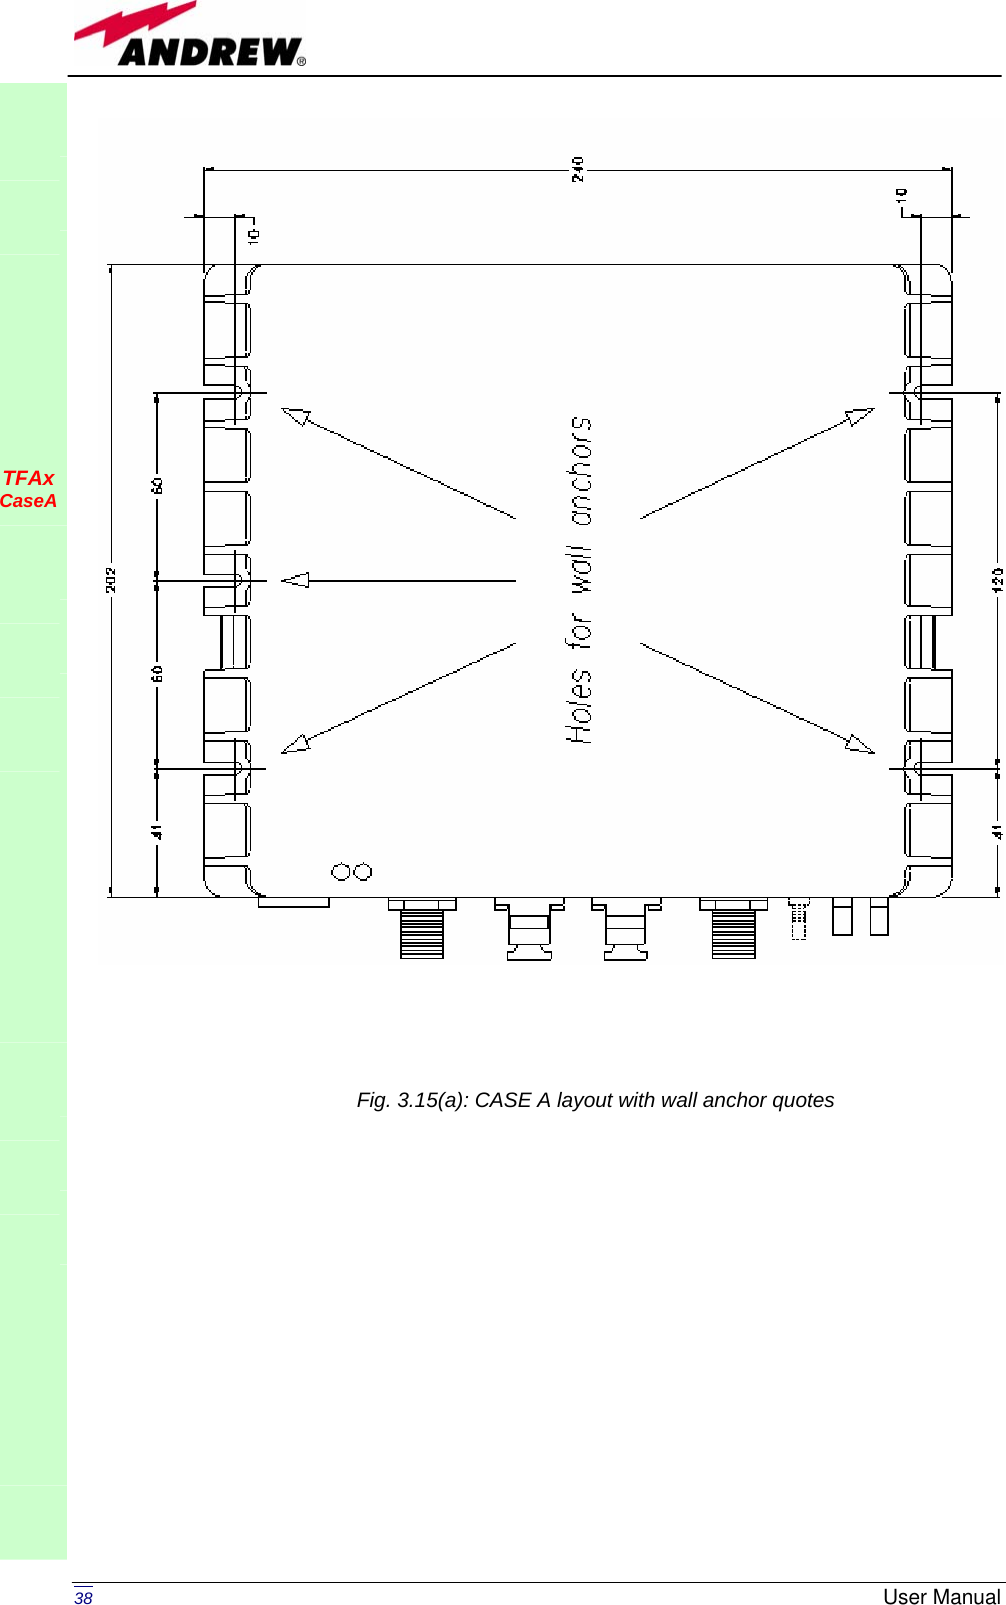   38  User Manual               TFAx CaseA               Fig. 3.15(a): CASE A layout with wall anchor quotes 